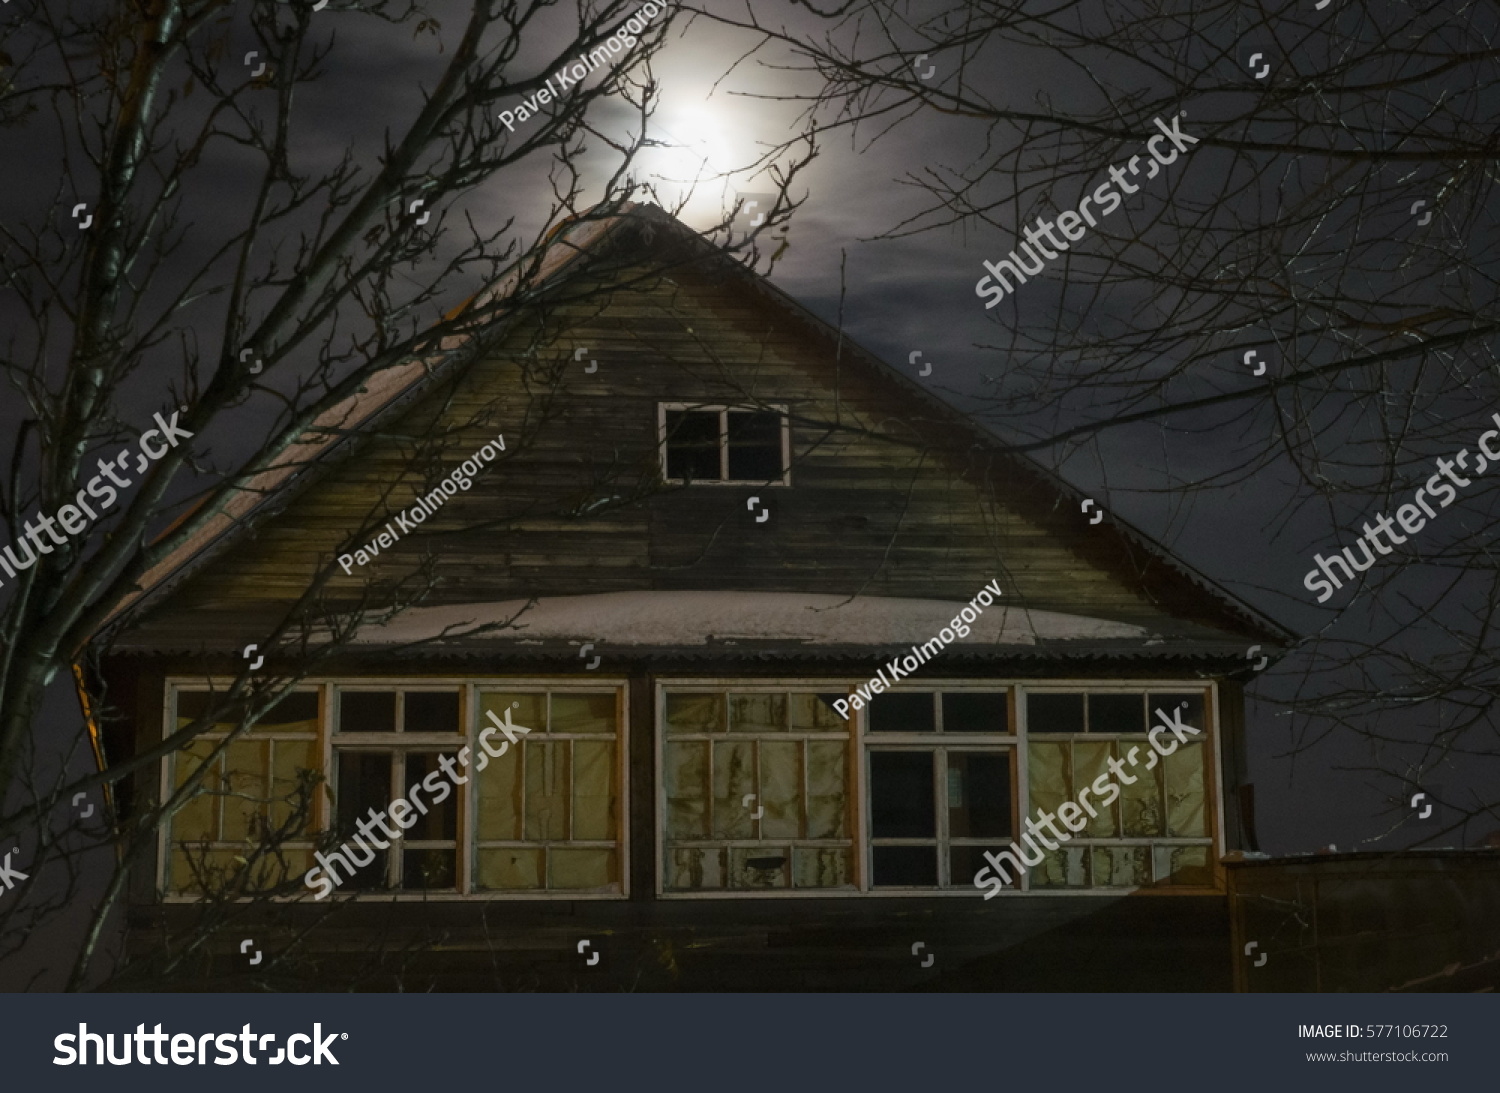 Old abandoned house in the light of the moon #577106722